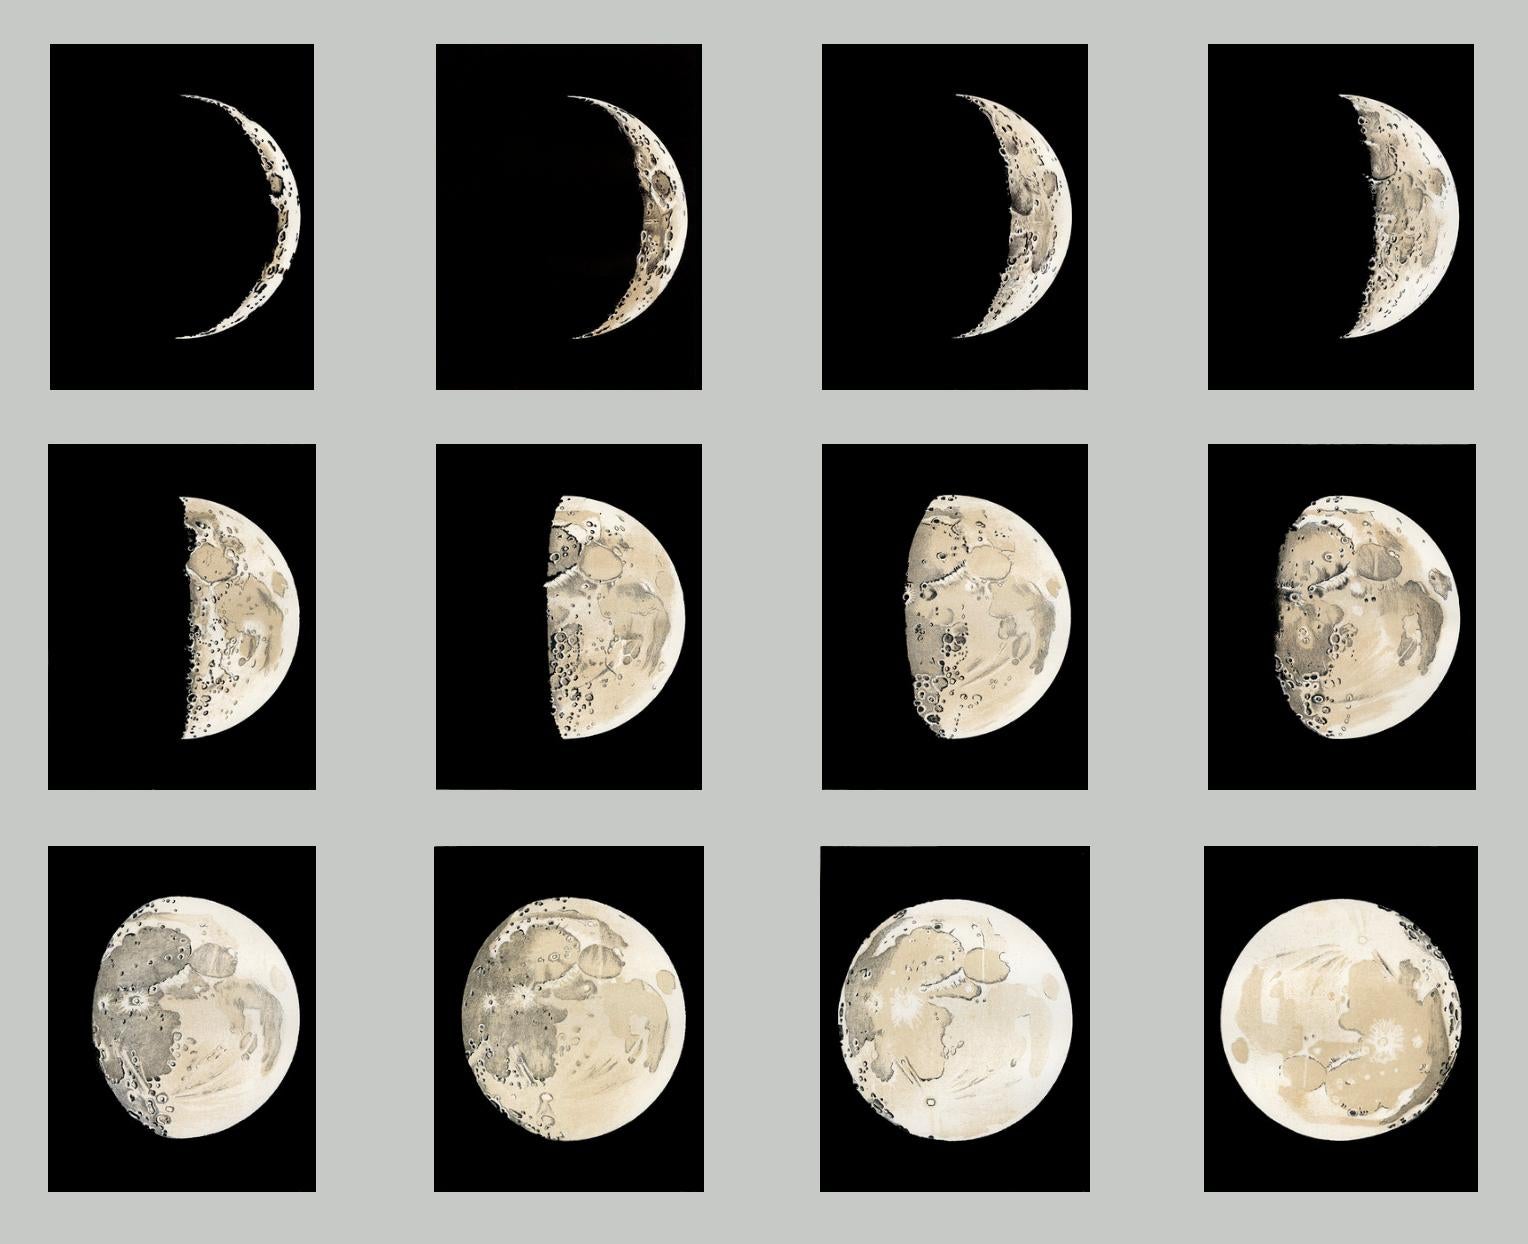 Sir Robert Stawell Ball Landscape Art - Popular Guide to the Heavens - Phases of the Moon